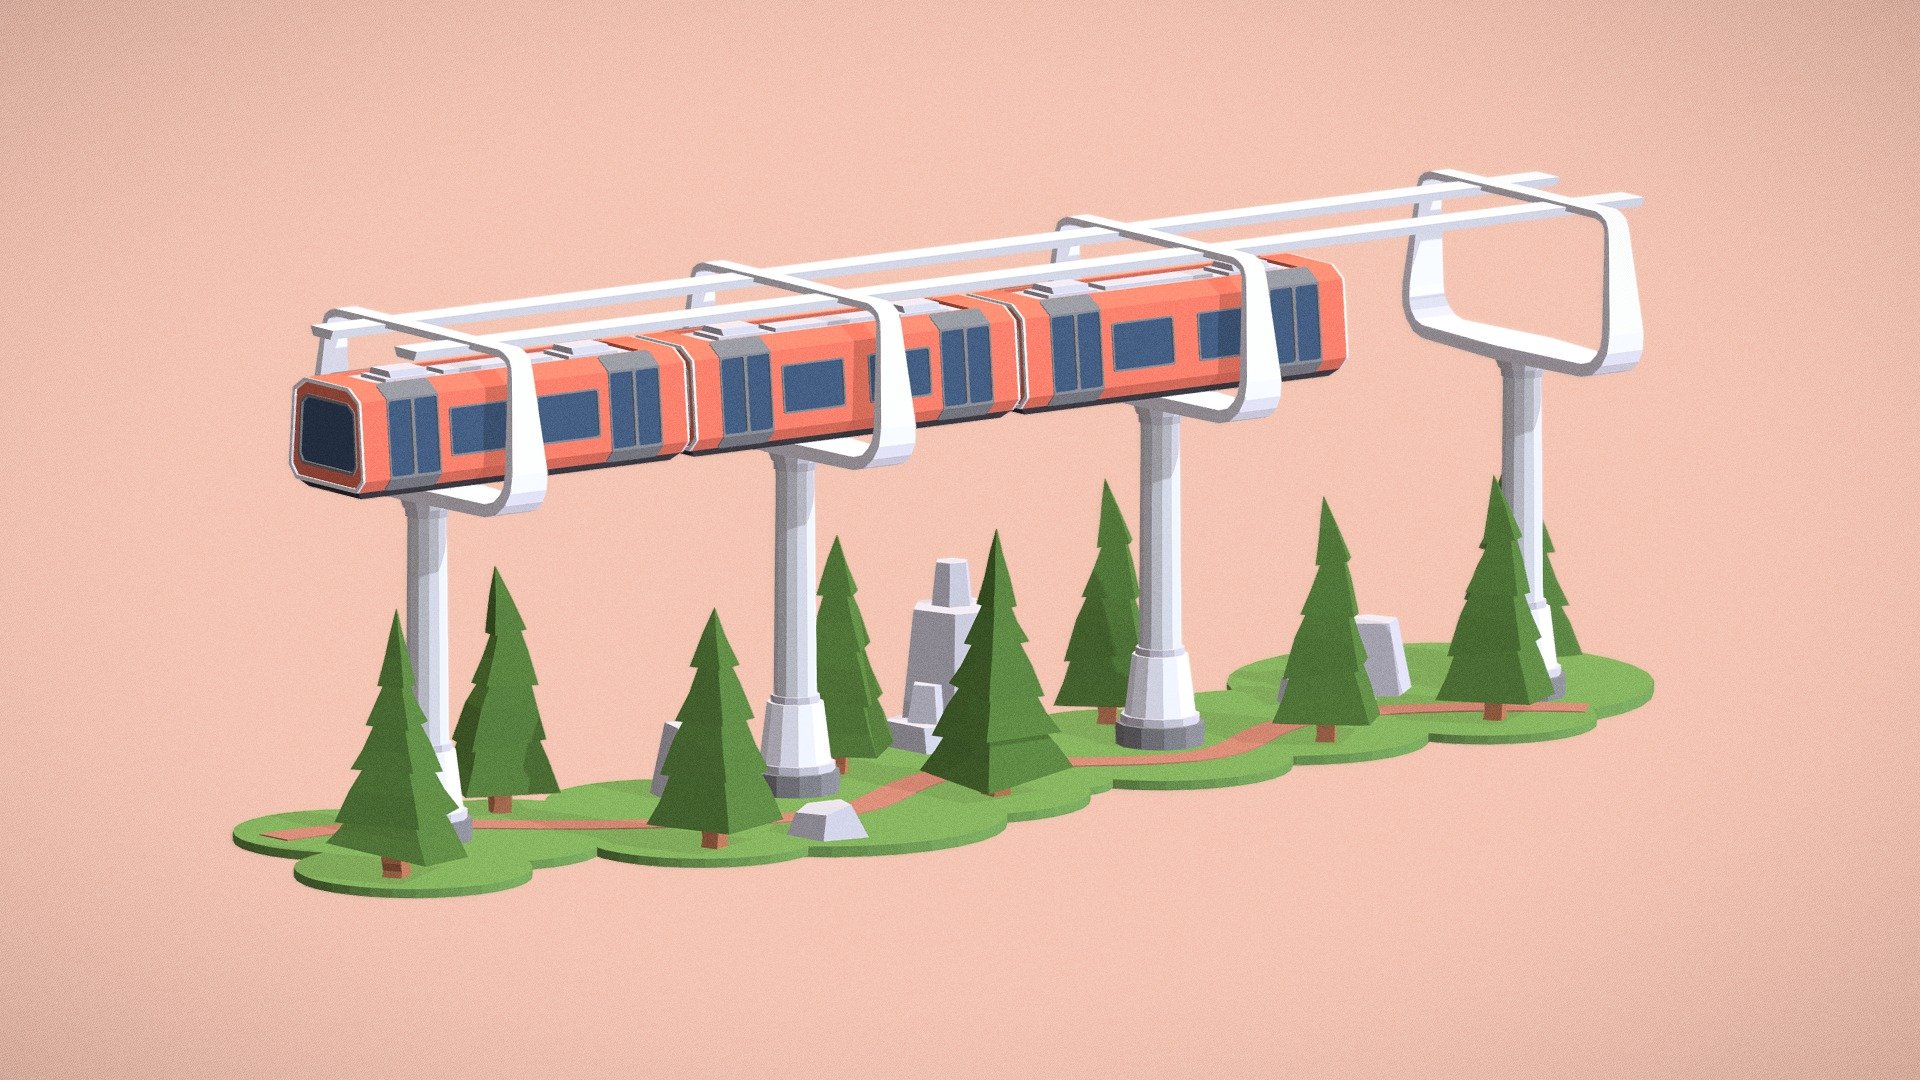 Low Poly Train In The Air